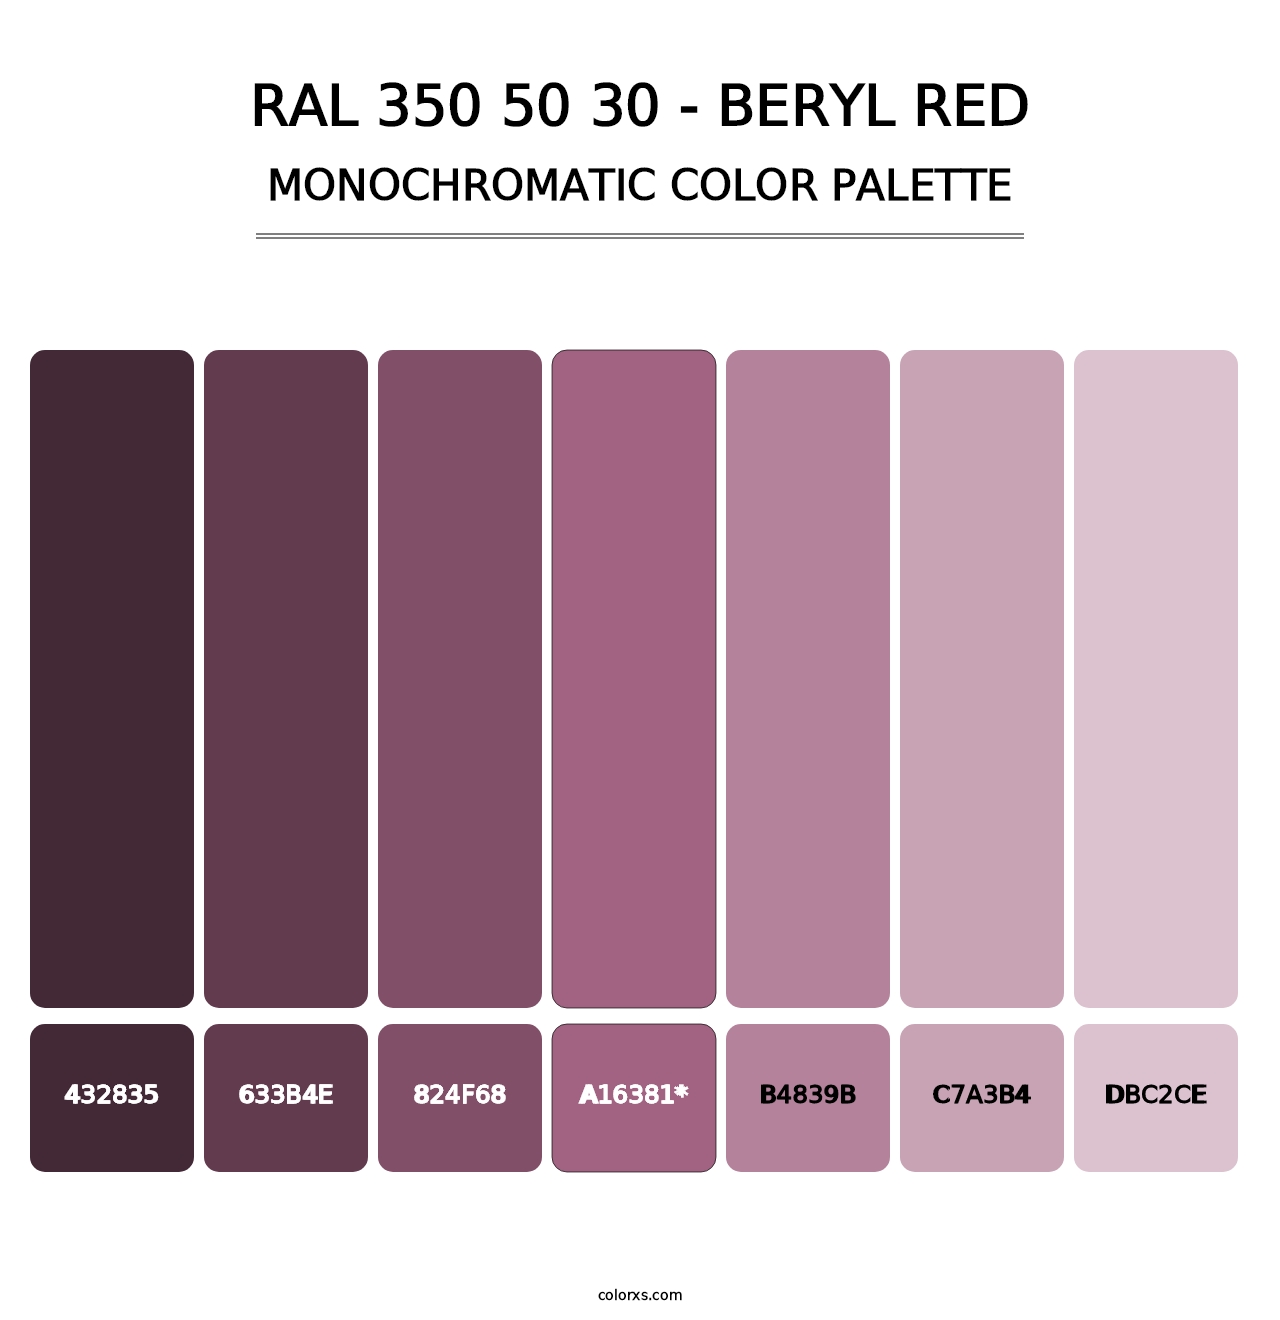 RAL 350 50 30 - Beryl Red - Monochromatic Color Palette